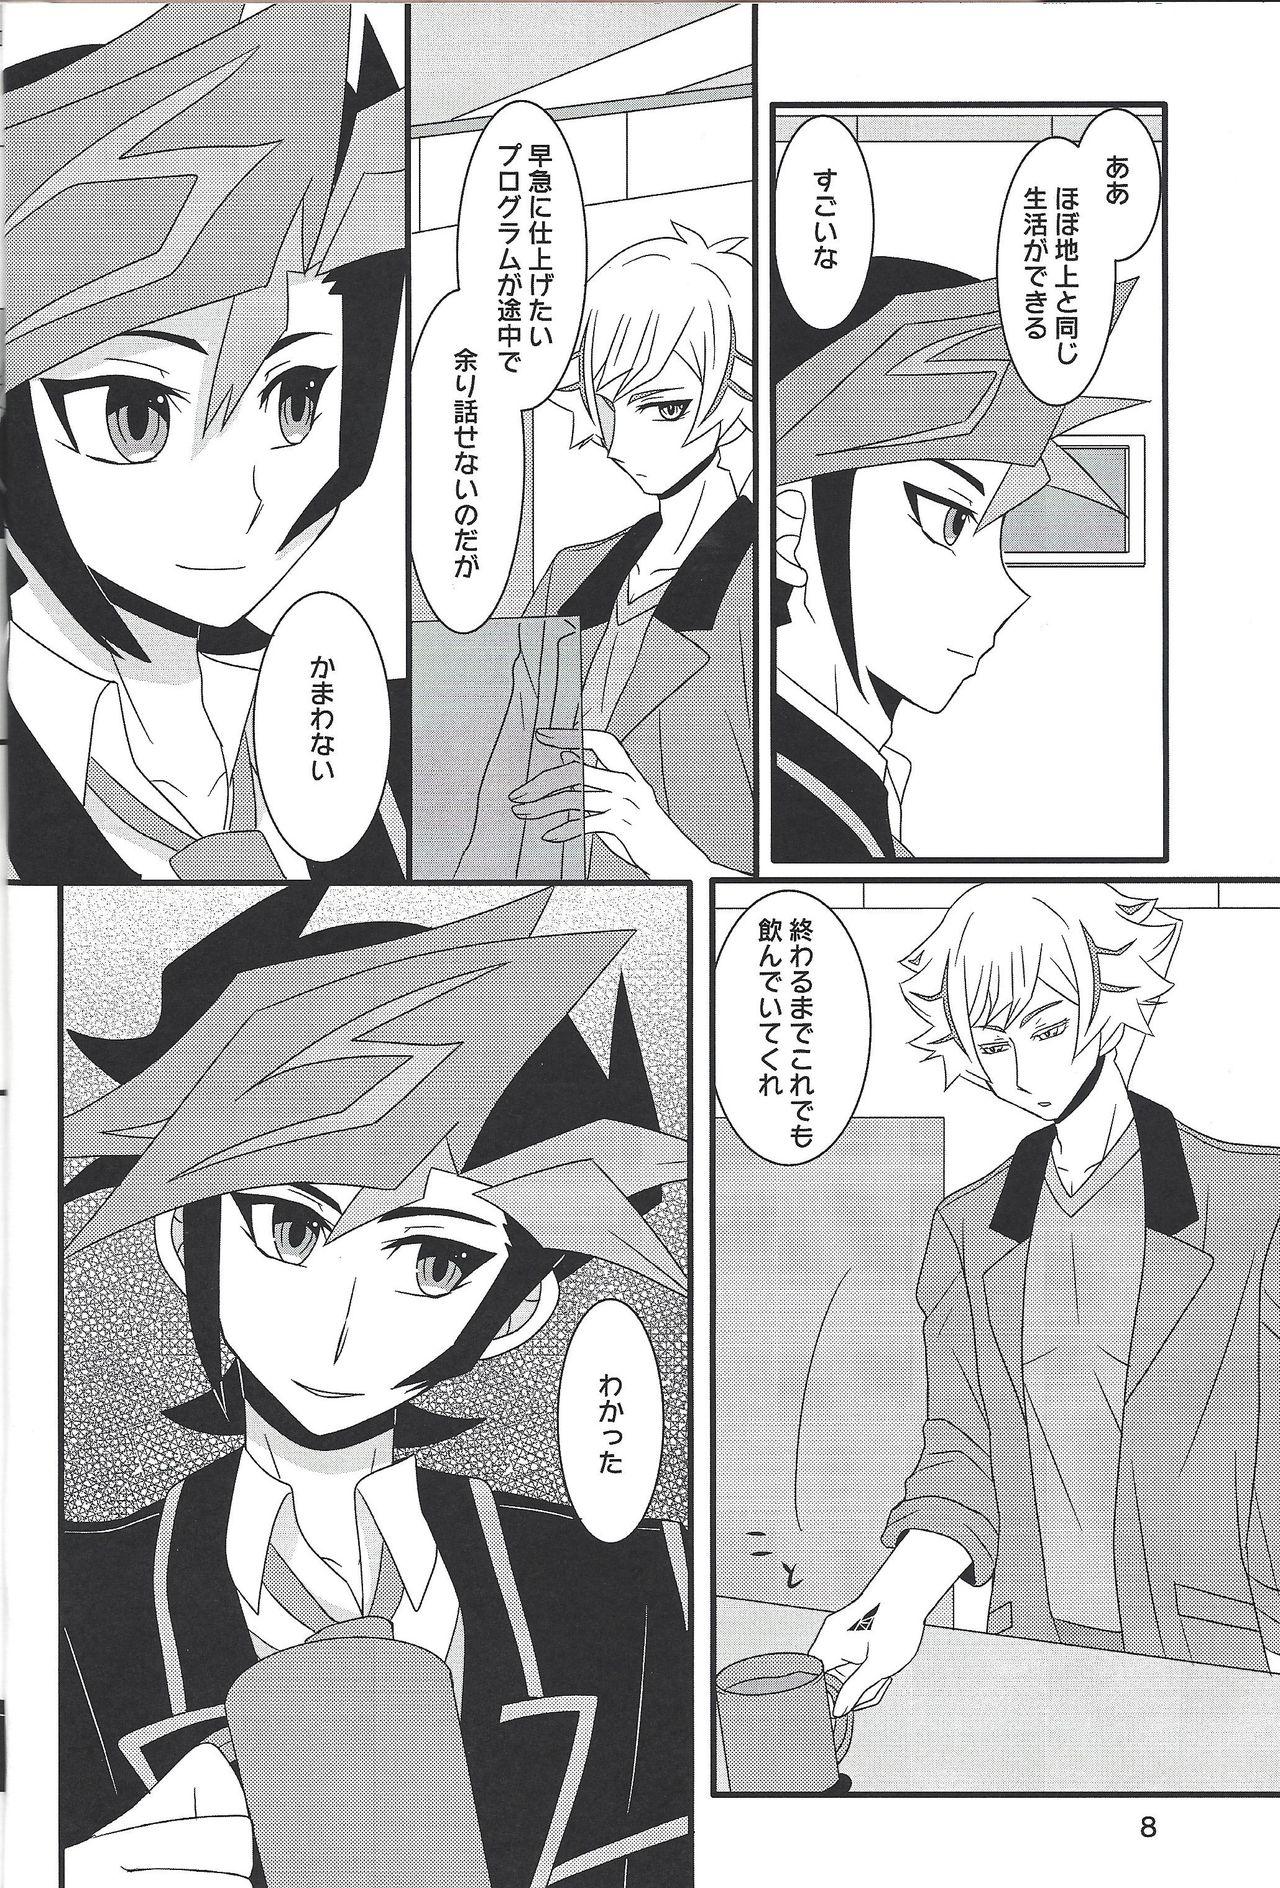 Naked Furious Lovers - Yu gi oh vrains Pornstar - Page 7